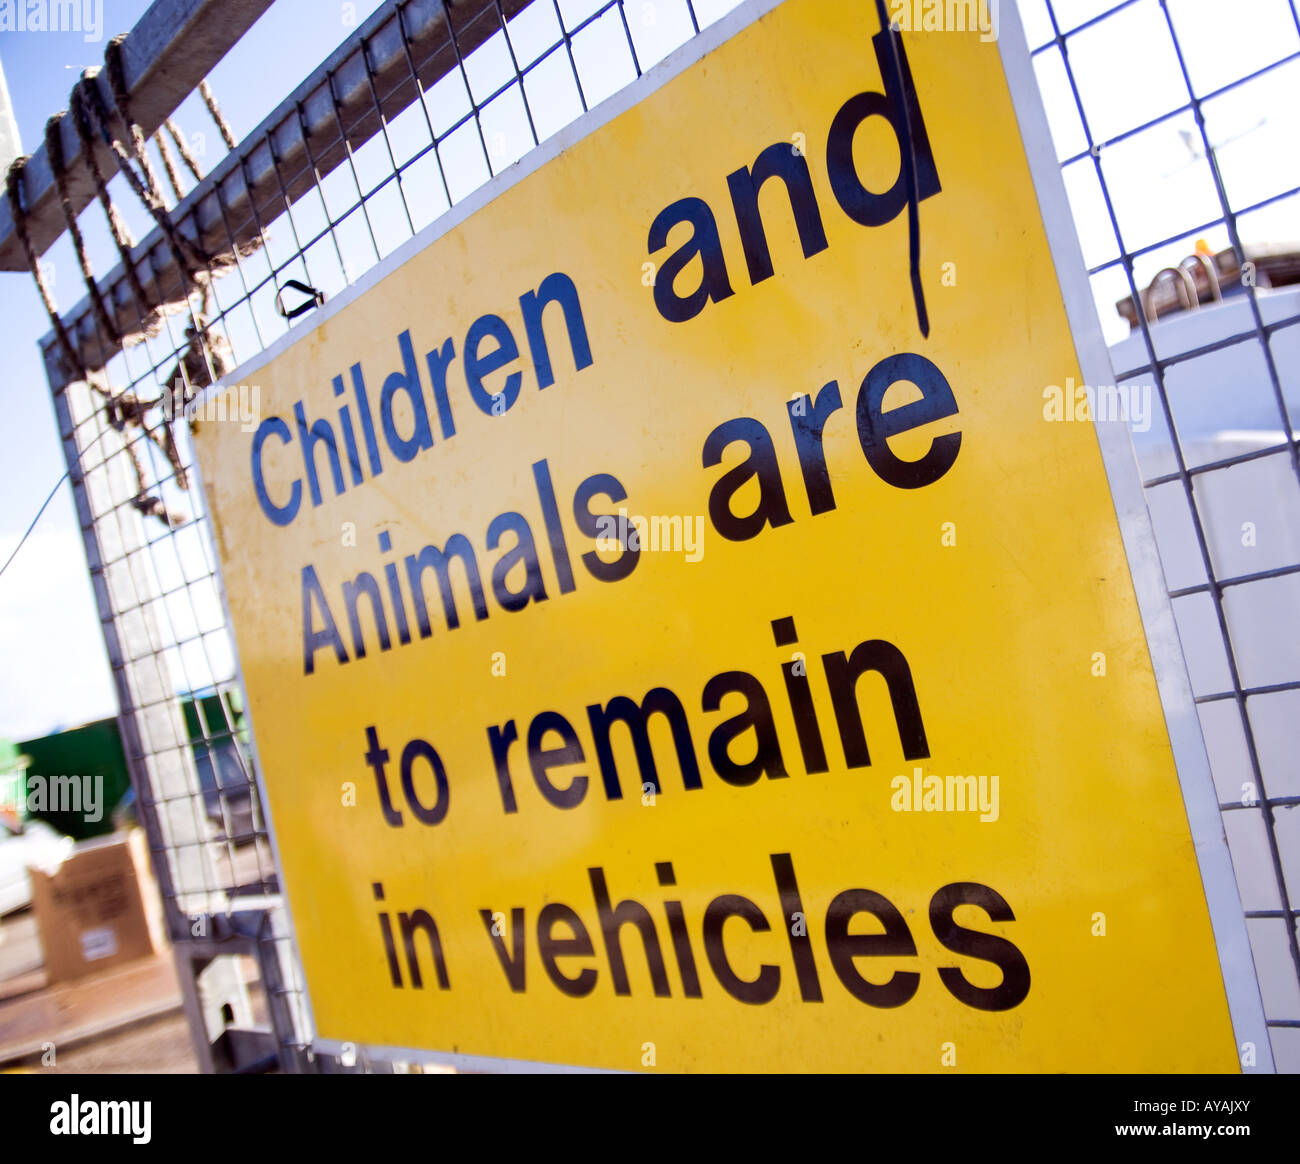 yellow waste and recycling sign at a local community site written in english clildren and animals to remain in vehicles Stock Photo